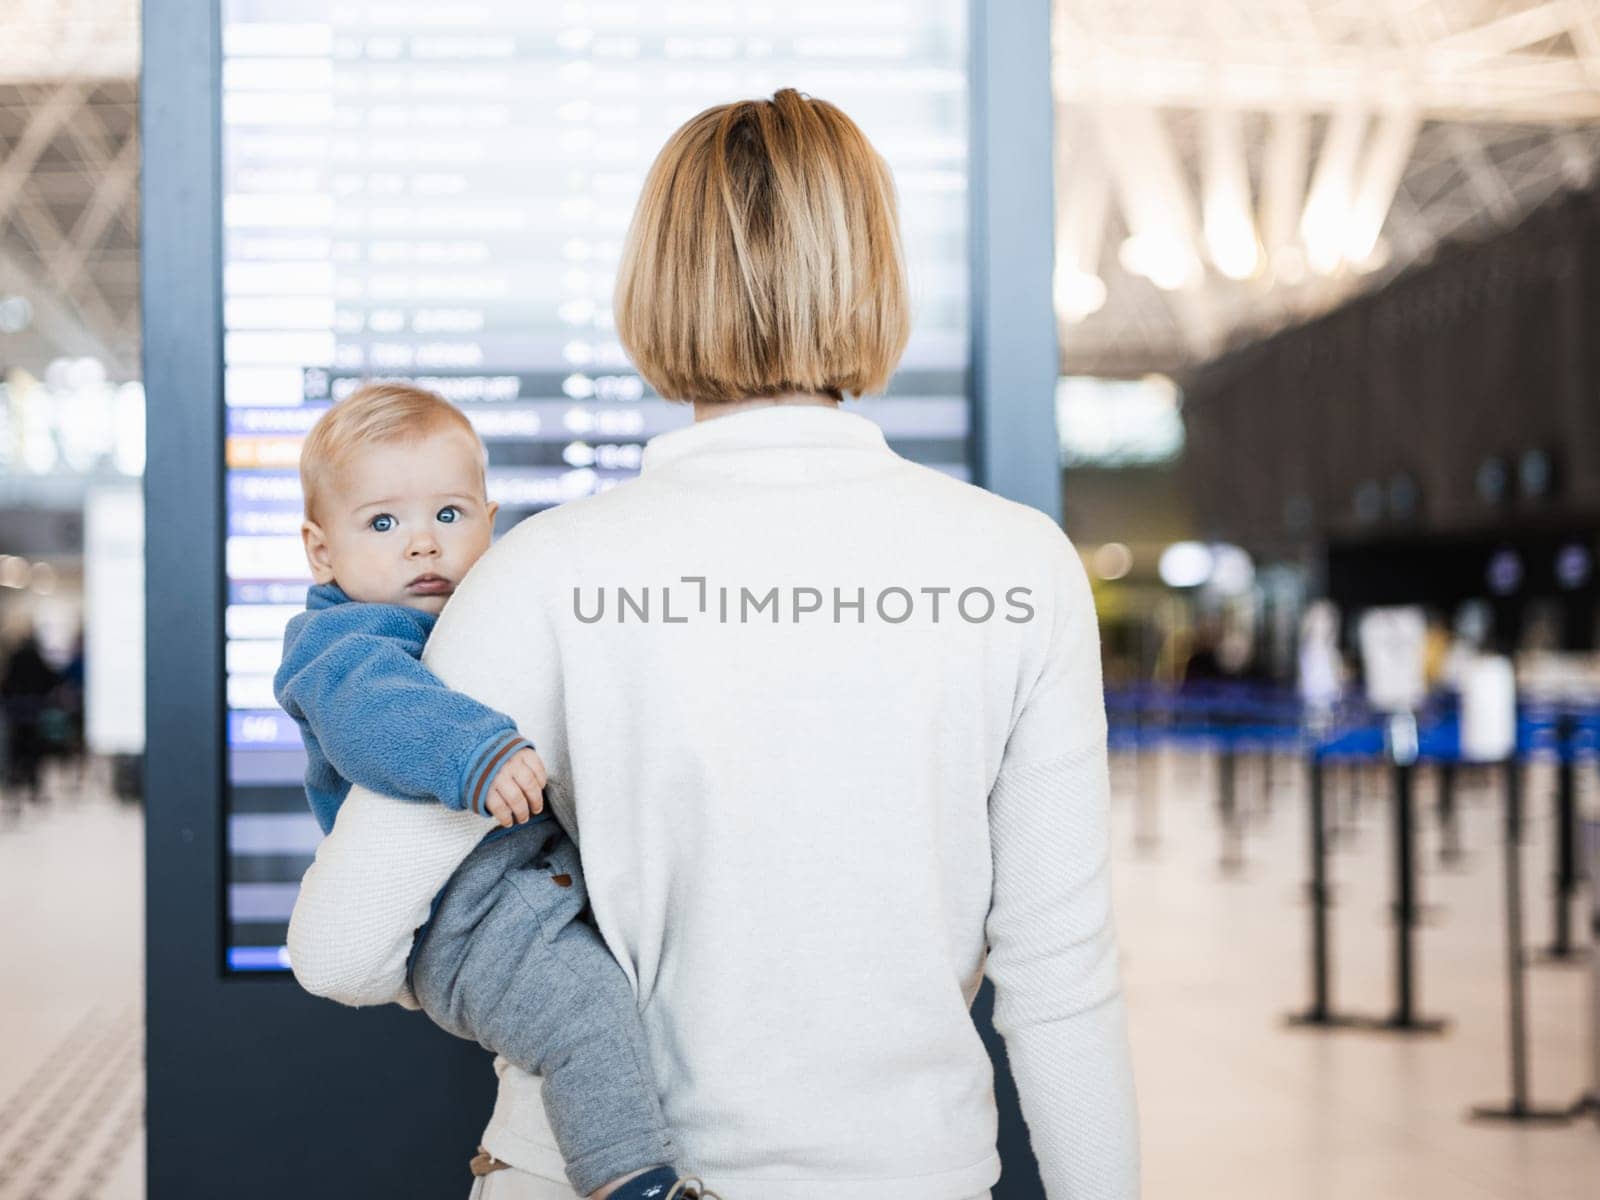 Mother traveling with child, holding his infant baby boy at airport terminal, checking flight schedule, waiting to board a plane. Travel with kids concept. by kasto